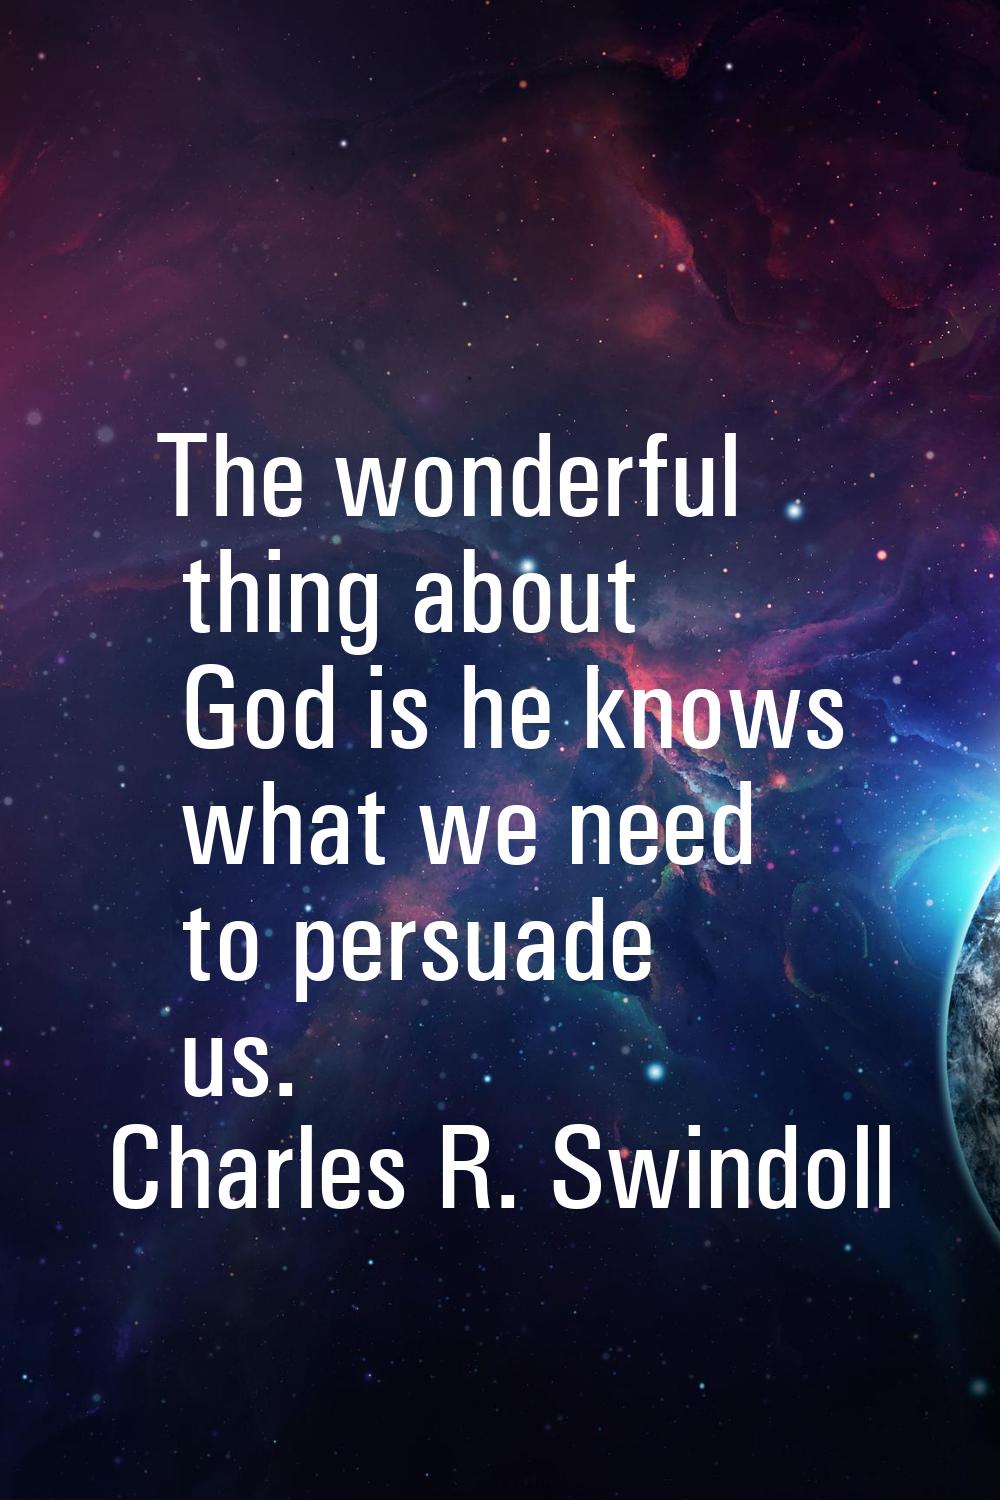 The wonderful thing about God is he knows what we need to persuade us.